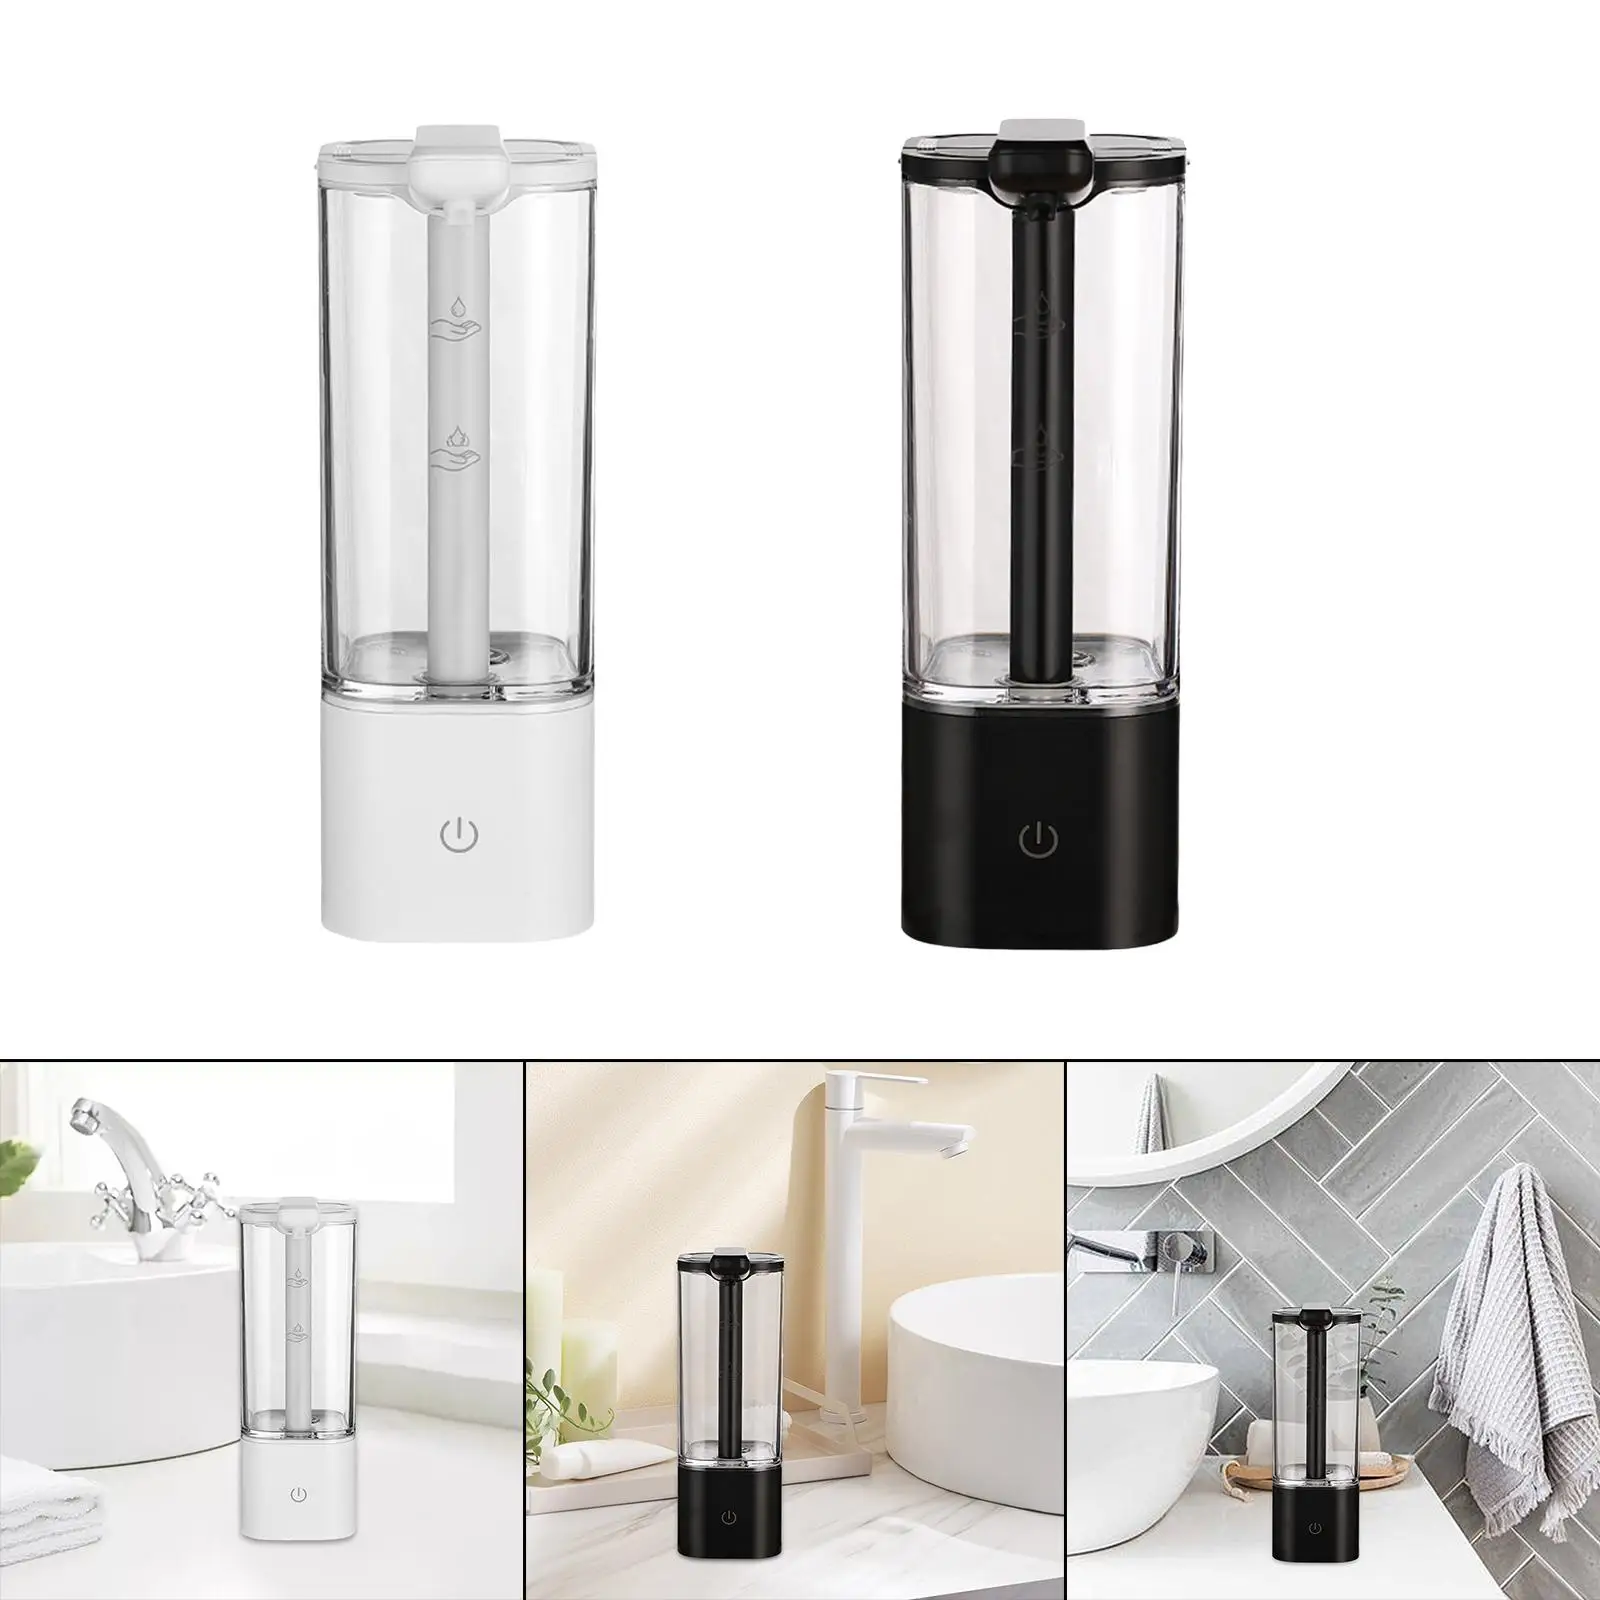 Automatic Liquid Soap Dispenser for Restaurant Commercial or Household Use